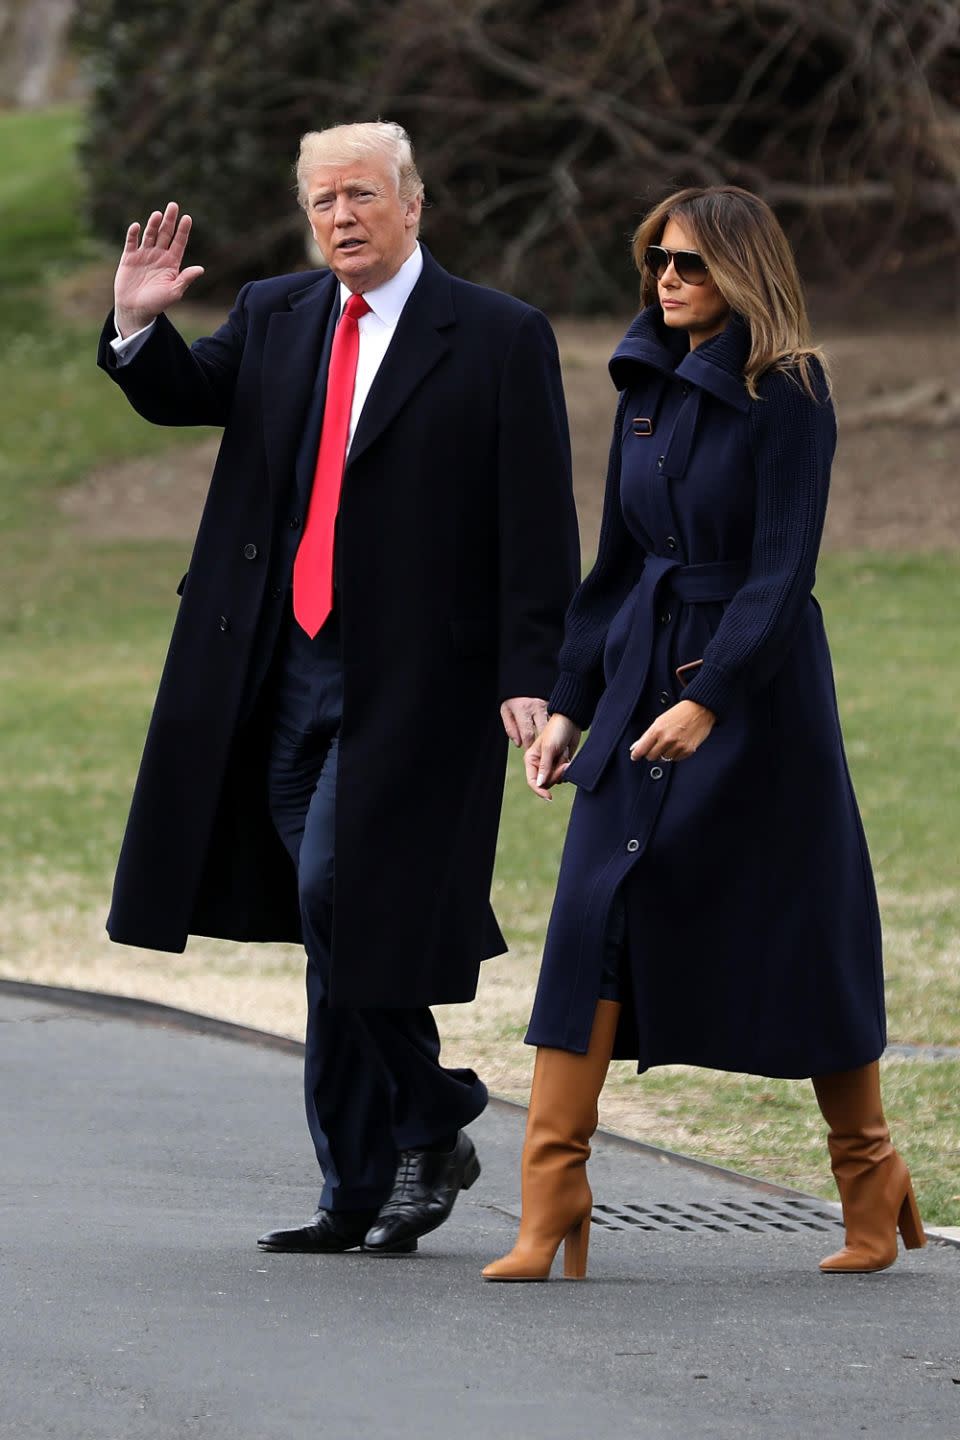 The couple weren't particularly touchy-feely as they headed to Marine One last week. Photo: Getty